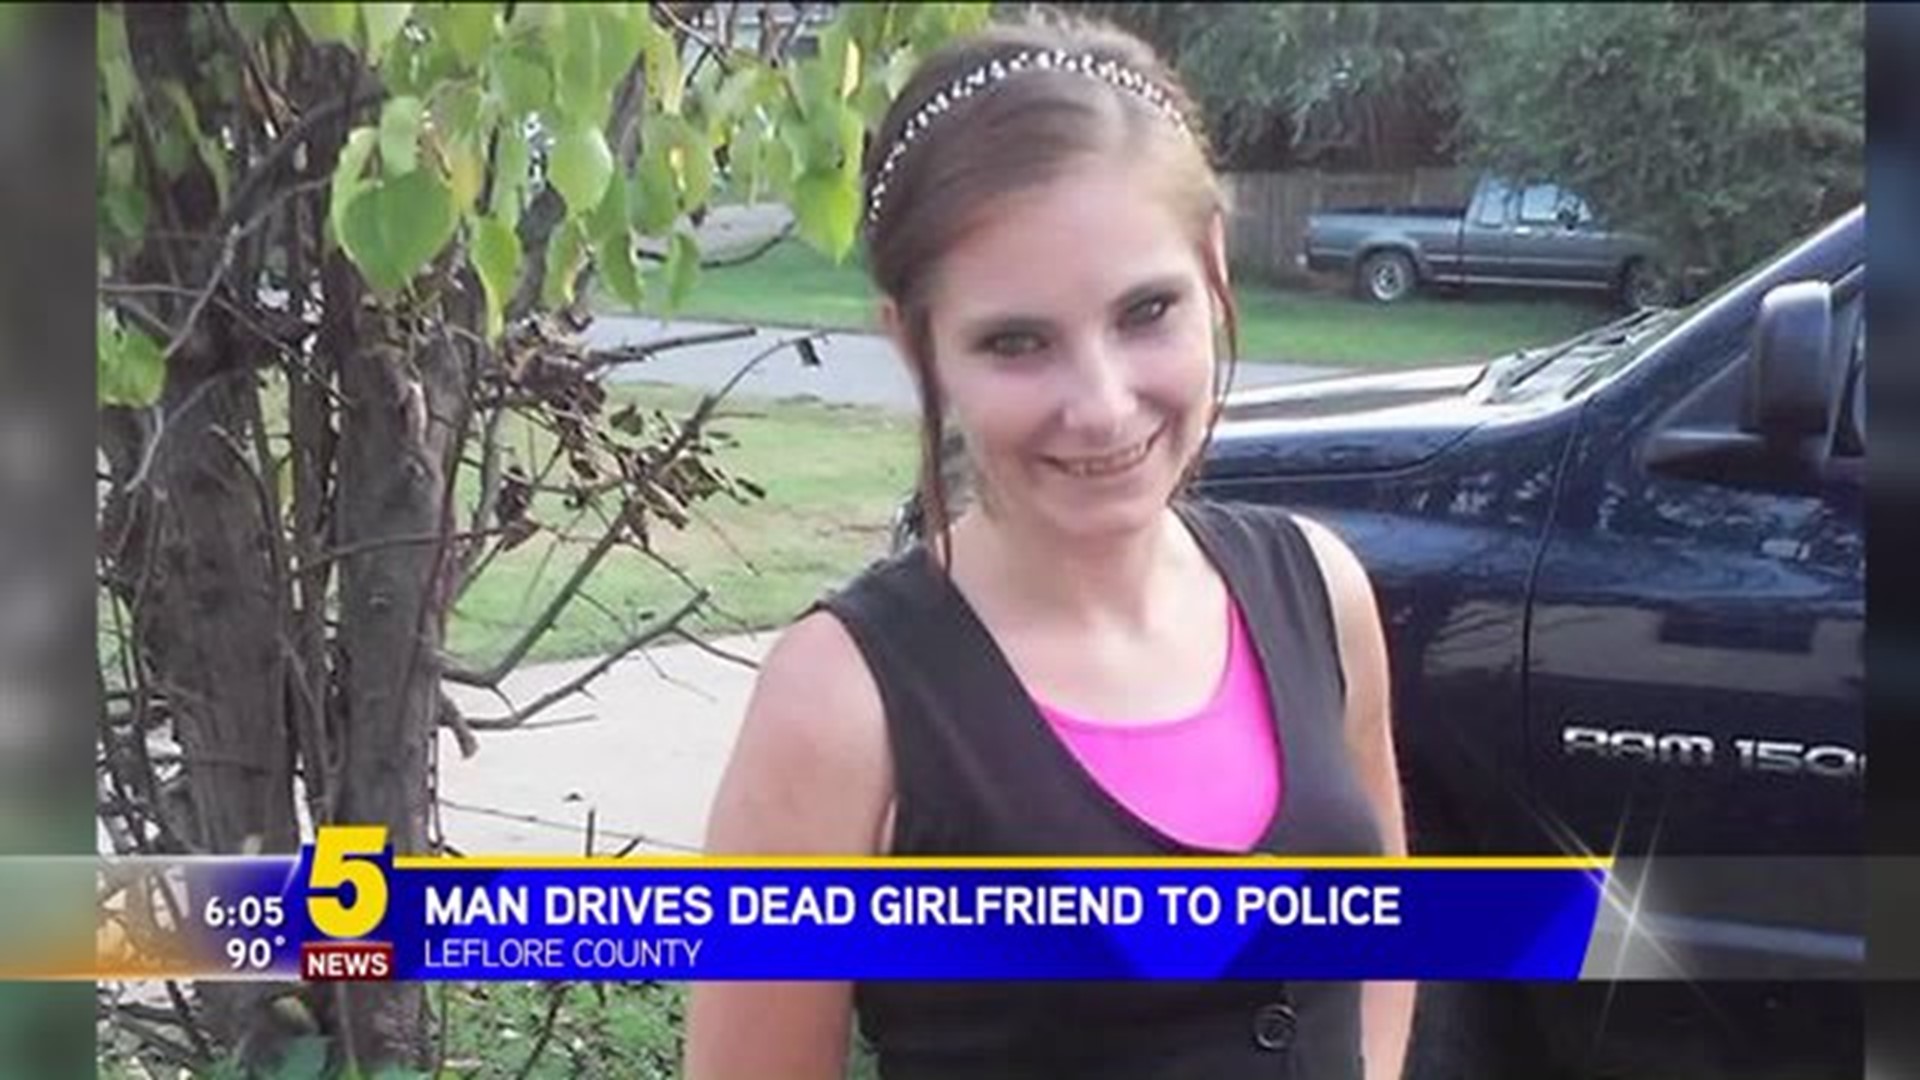 Man Drives Dead Girlfriend To Police